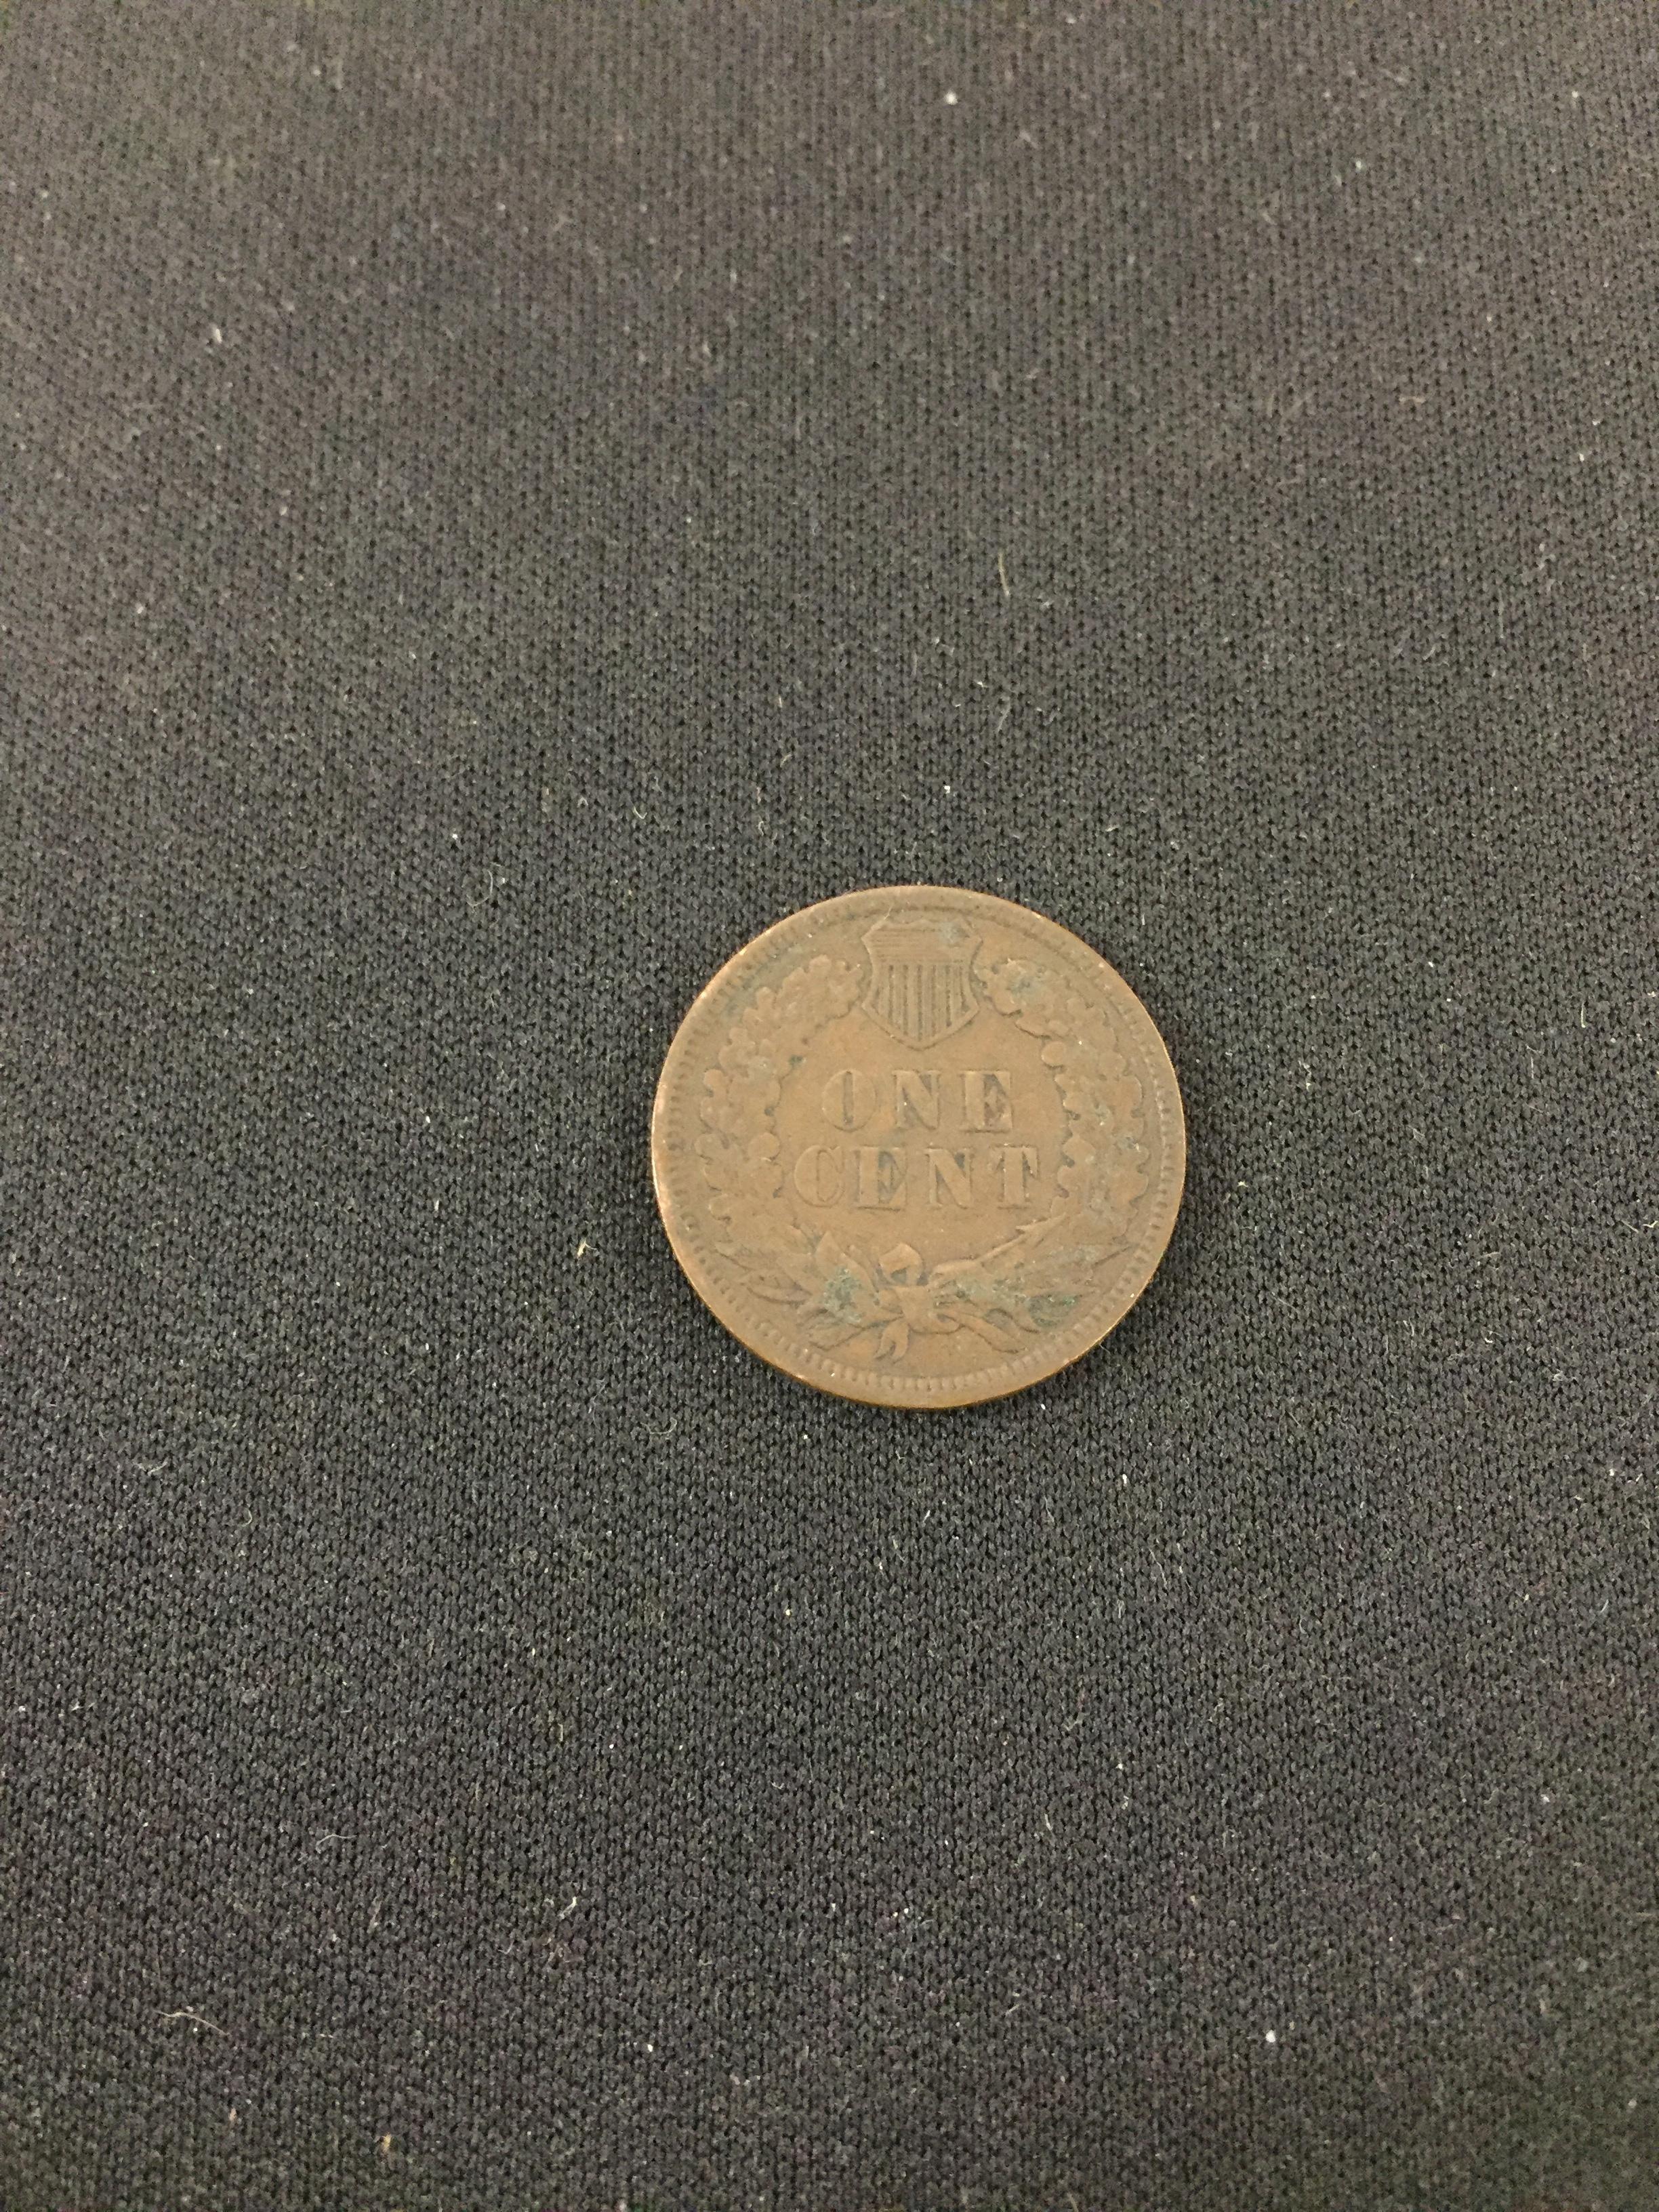 1892 United States Indian Head Penny